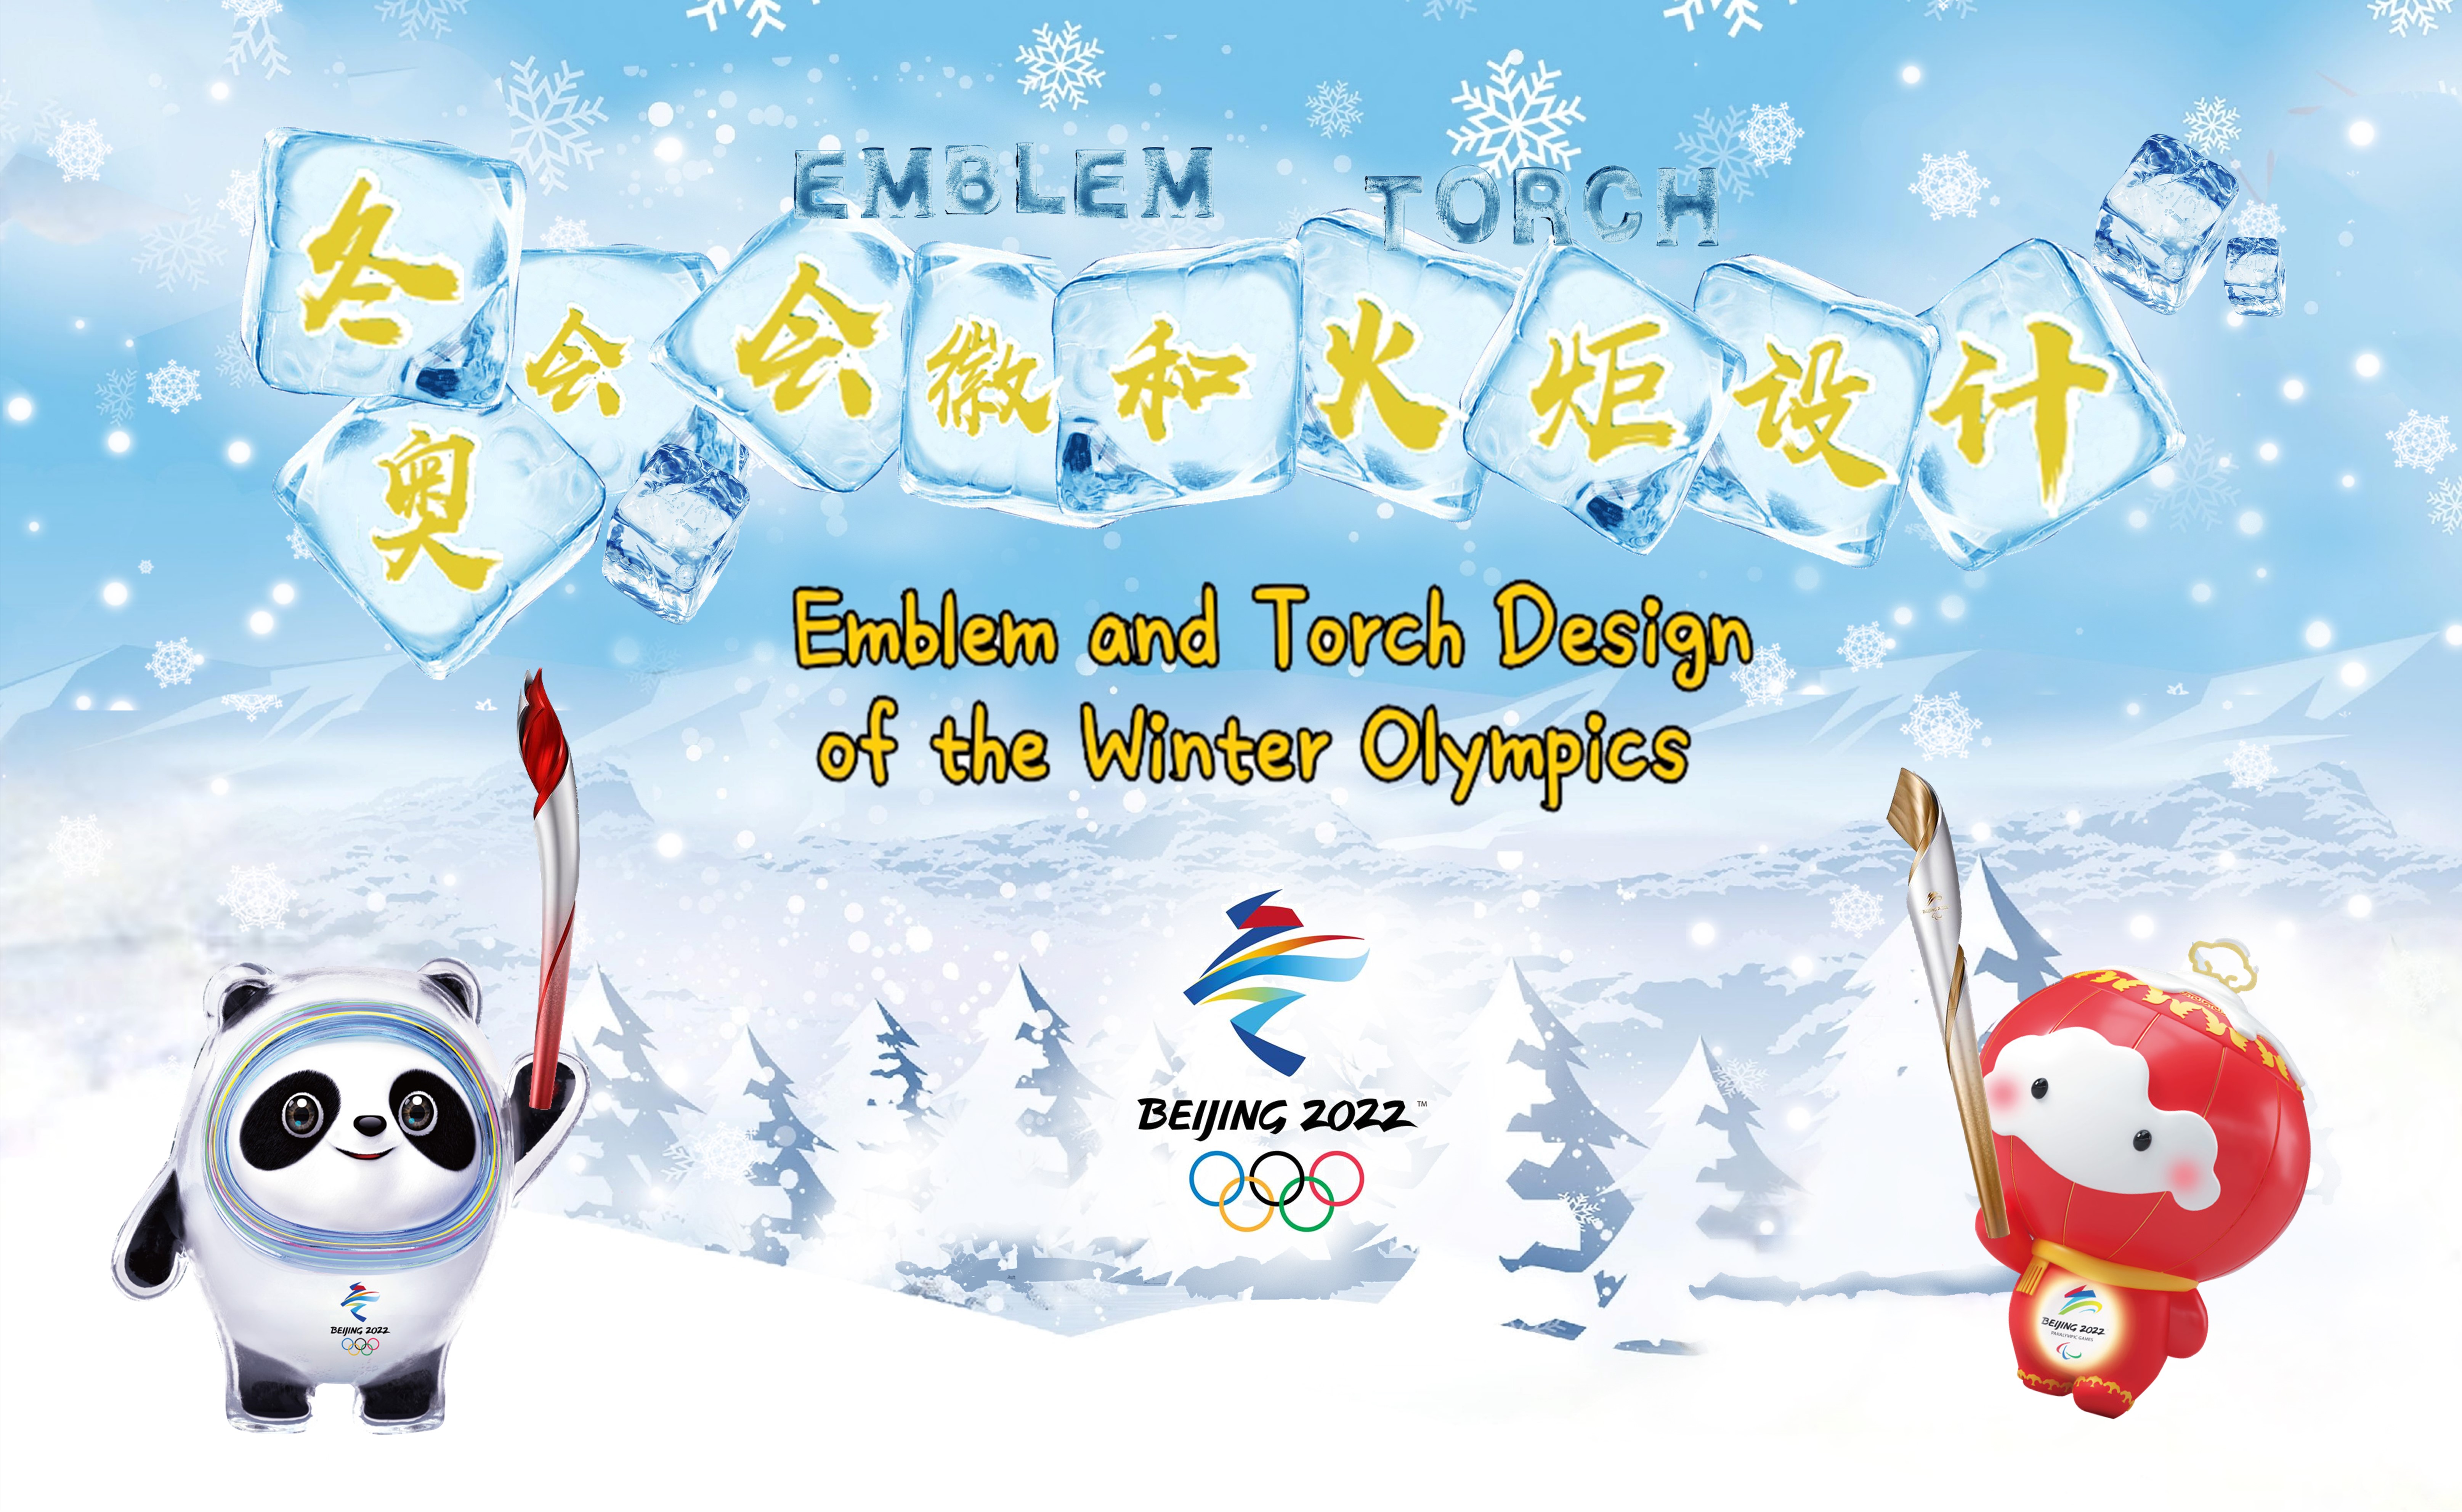 Emblem and Torch Design of the Winter Olympics